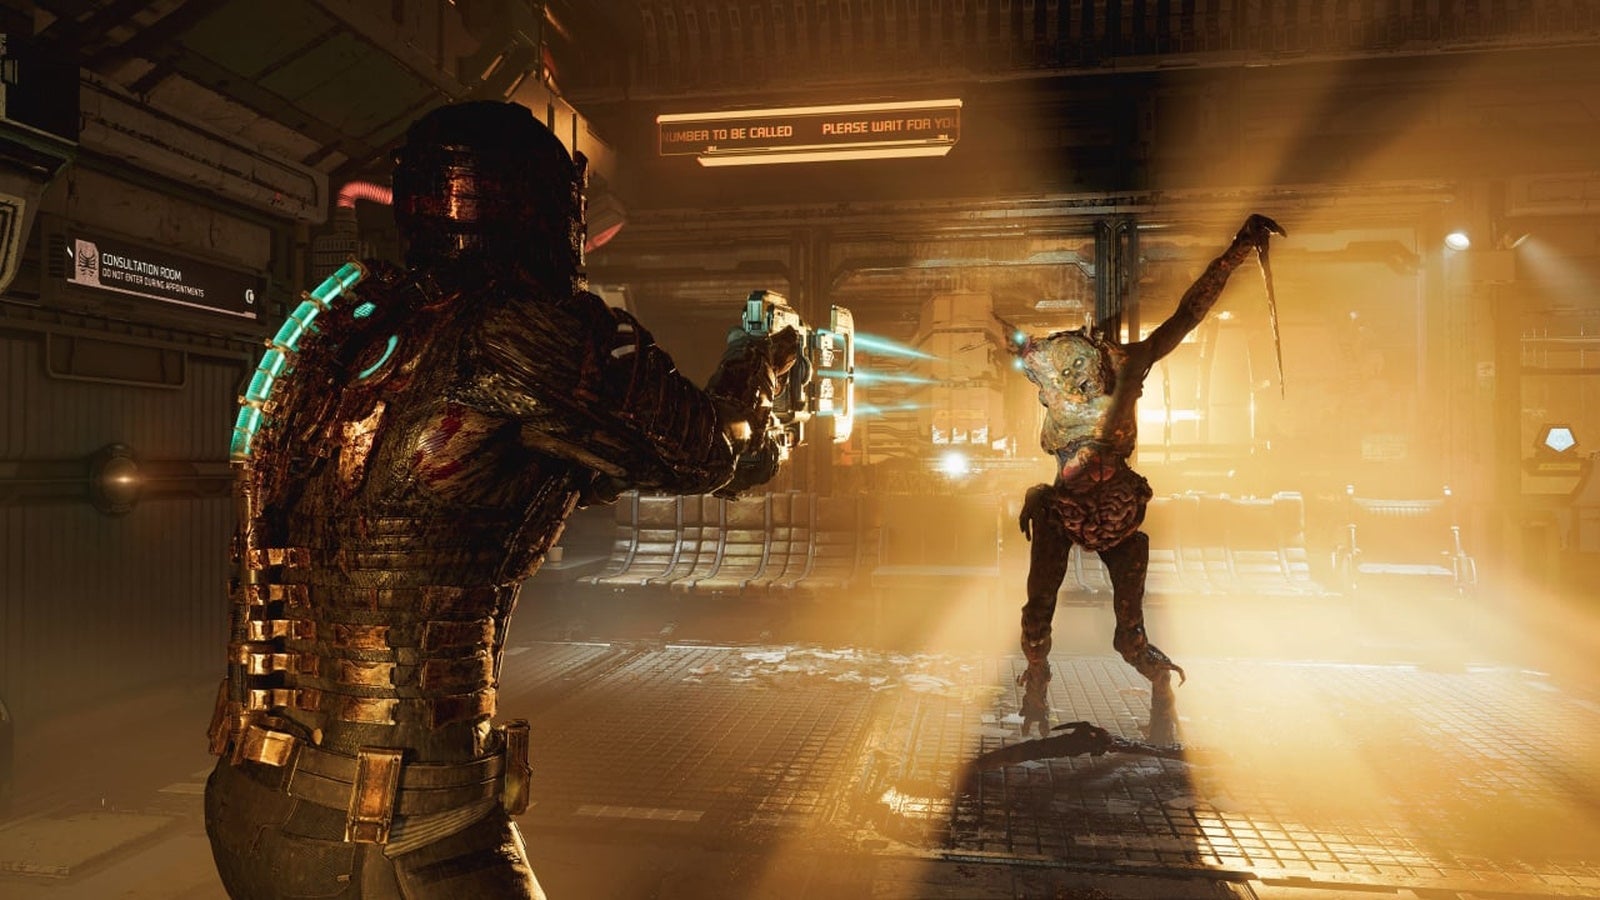 Dead Space Master Override Rig locations for 'You Are Not 